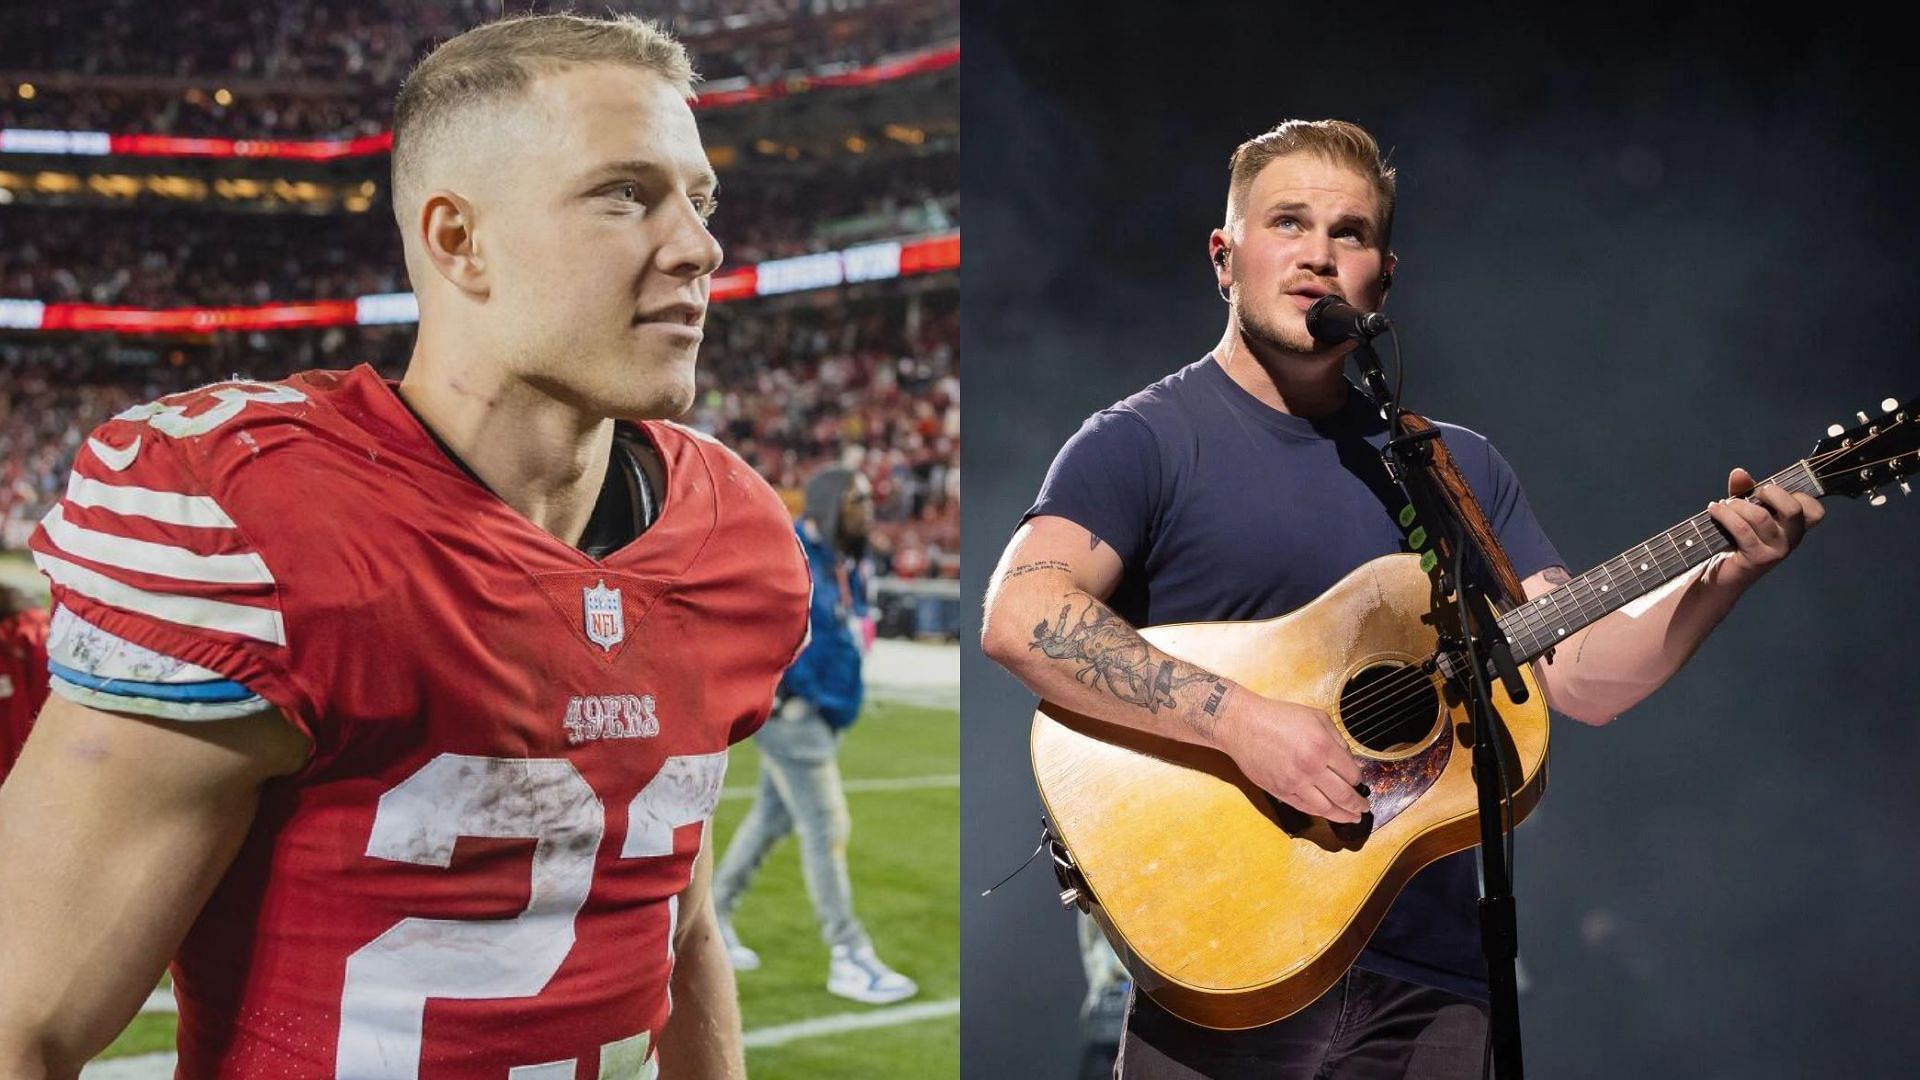 49ers RB Christian McCaffrey (L) jams on piano during country singer Zach Bryan